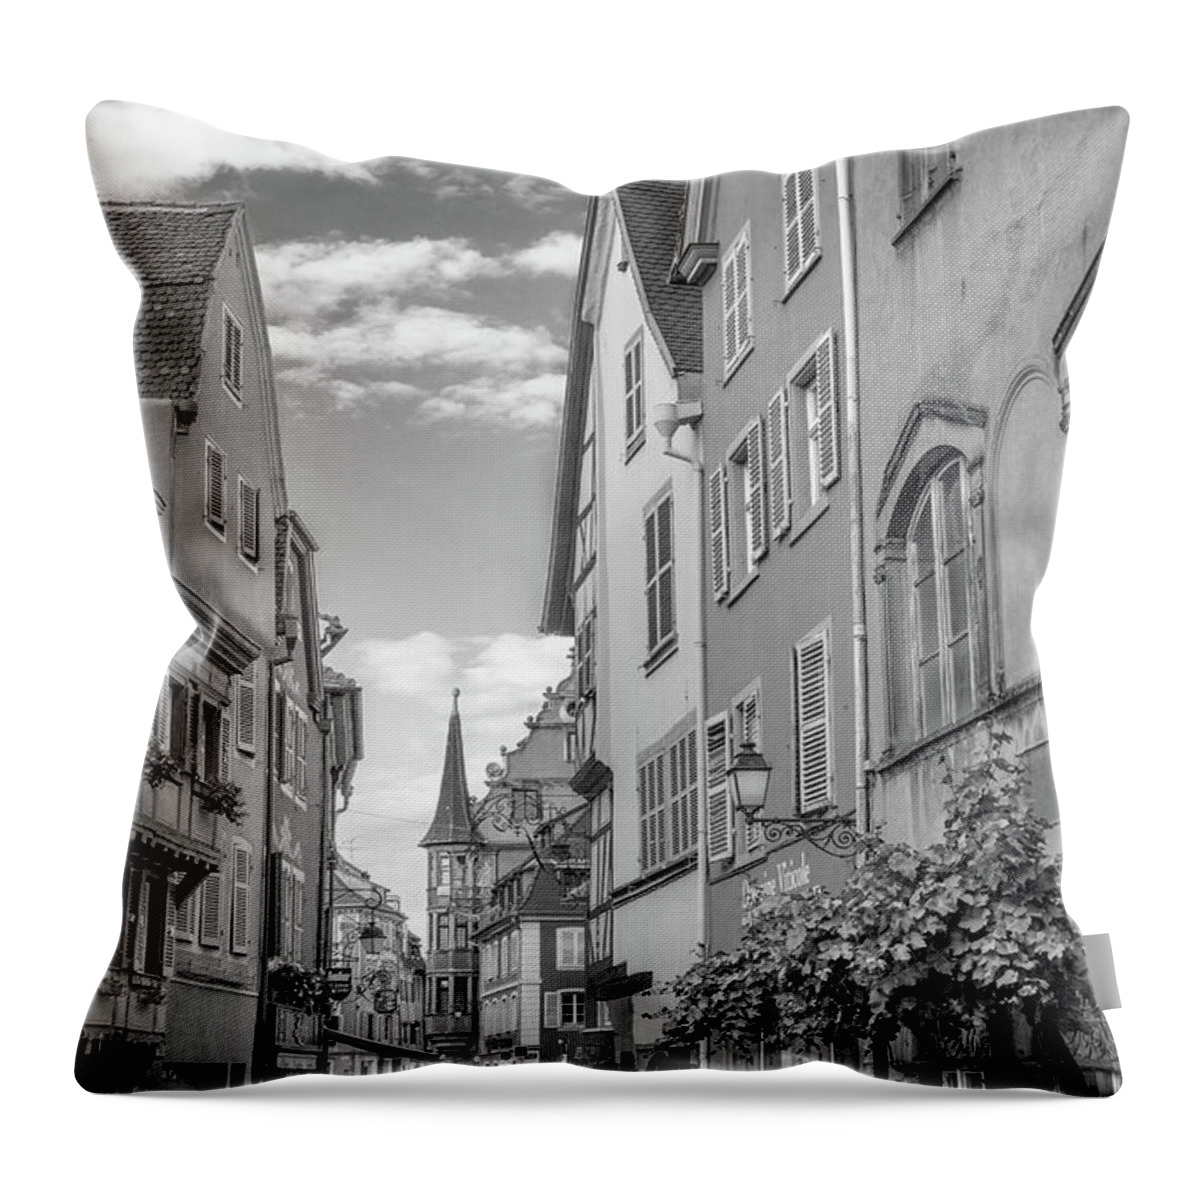 Travel Throw Pillow featuring the photograph A Street in Colmar by W Chris Fooshee